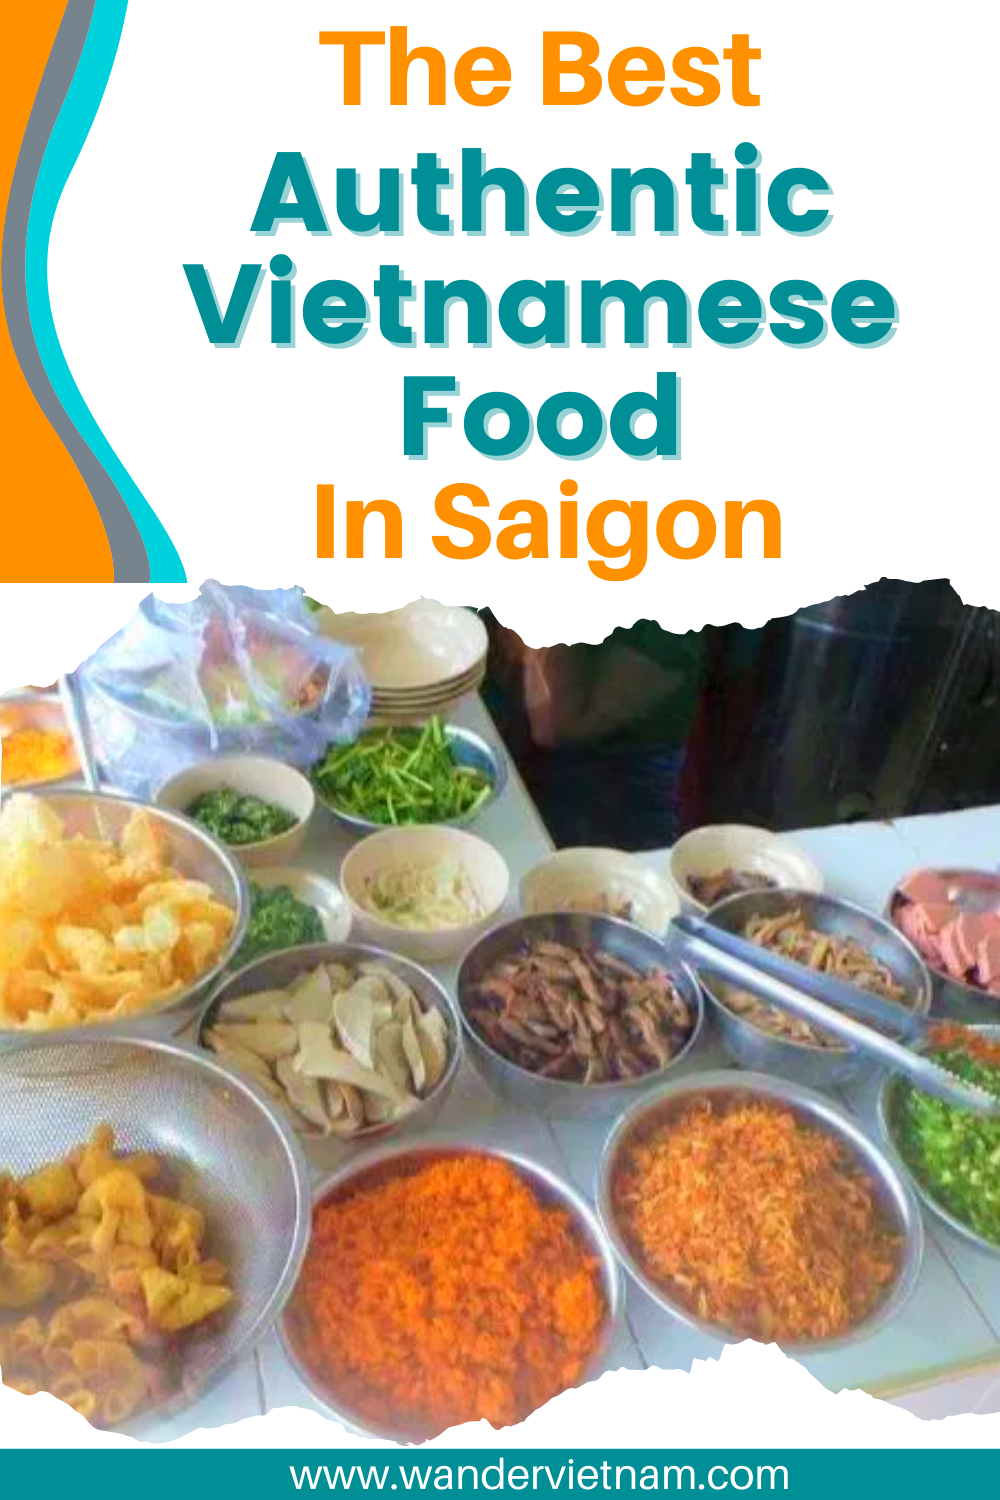 The Best Vietnamese Food in Saigon That You Have to Try